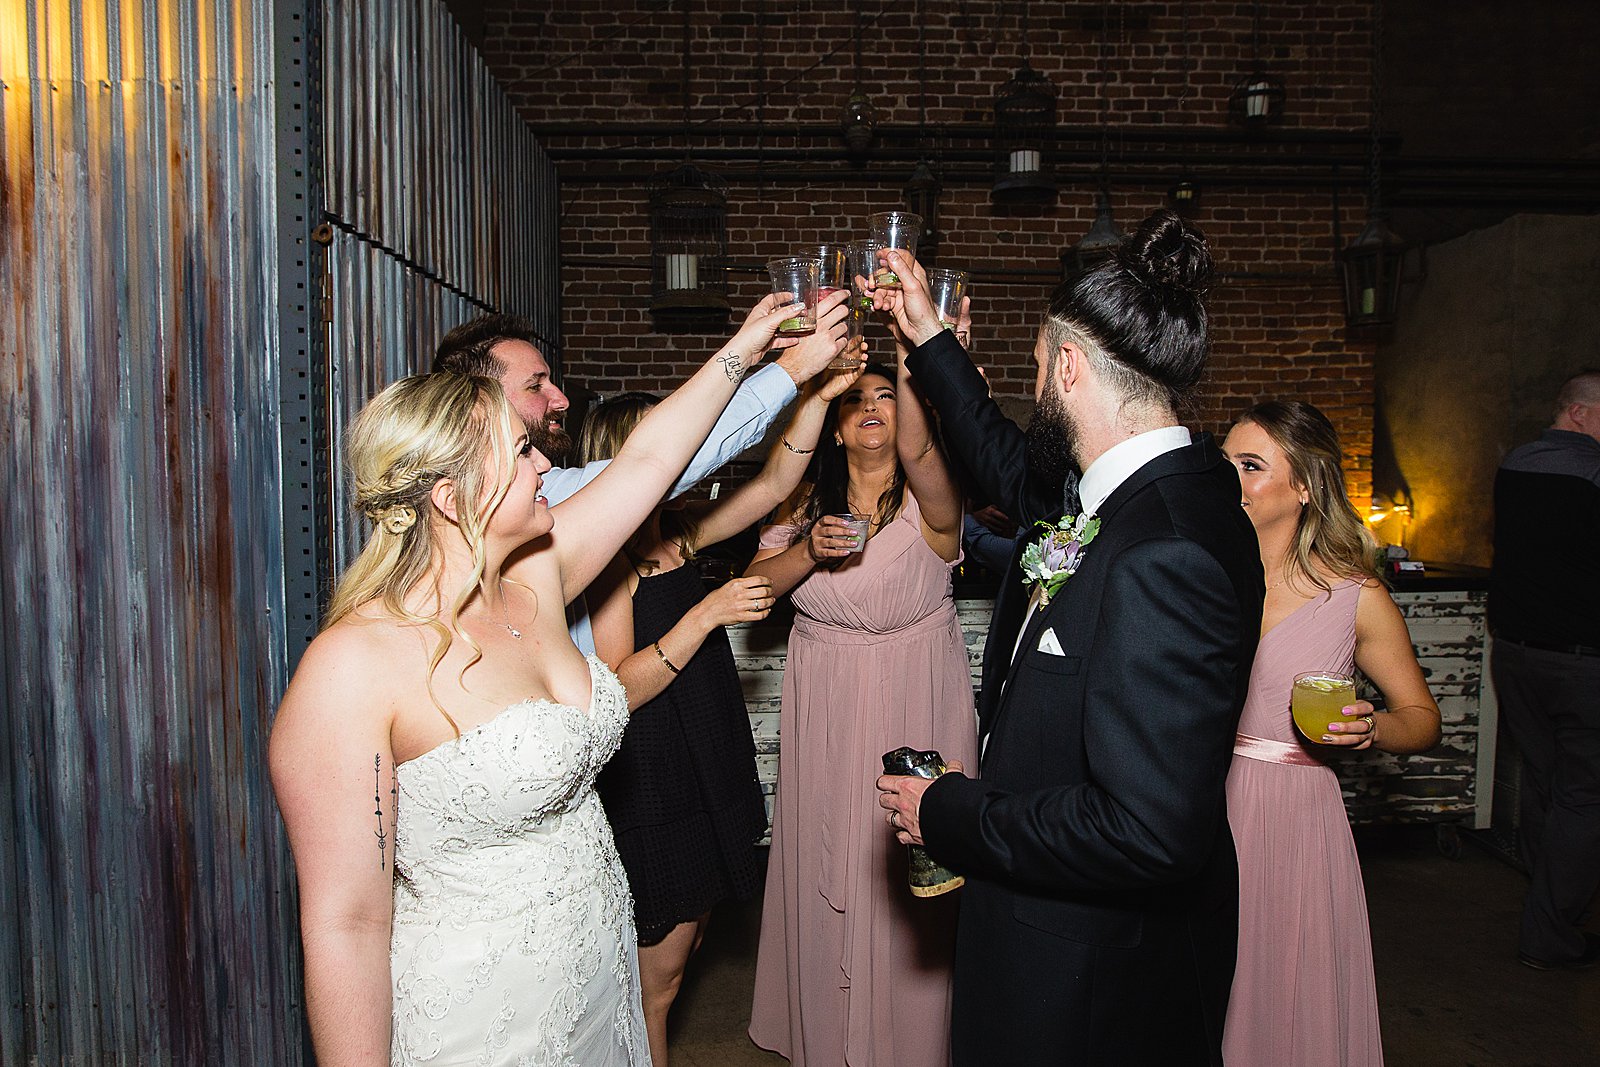 Bride and groom share shots with guests at their first Ice House wedding reception by Arizona wedding photographer PMA photography.